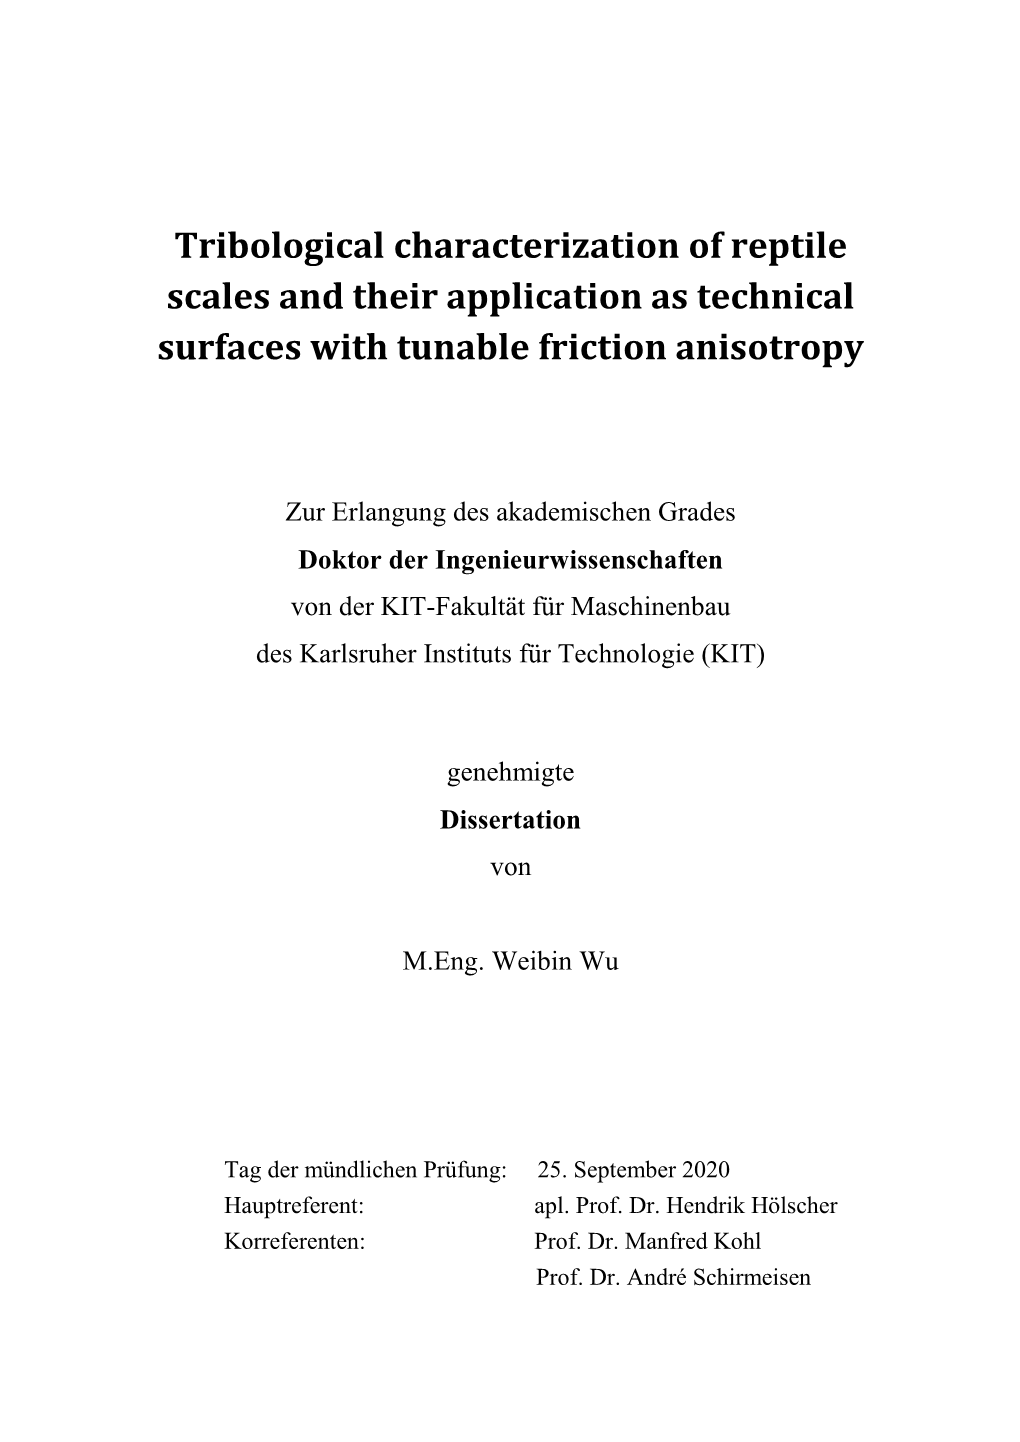 Tribological Characterization of Reptile Scales and Their Application As Technical Surfaces with Tunable Friction Anisotropy